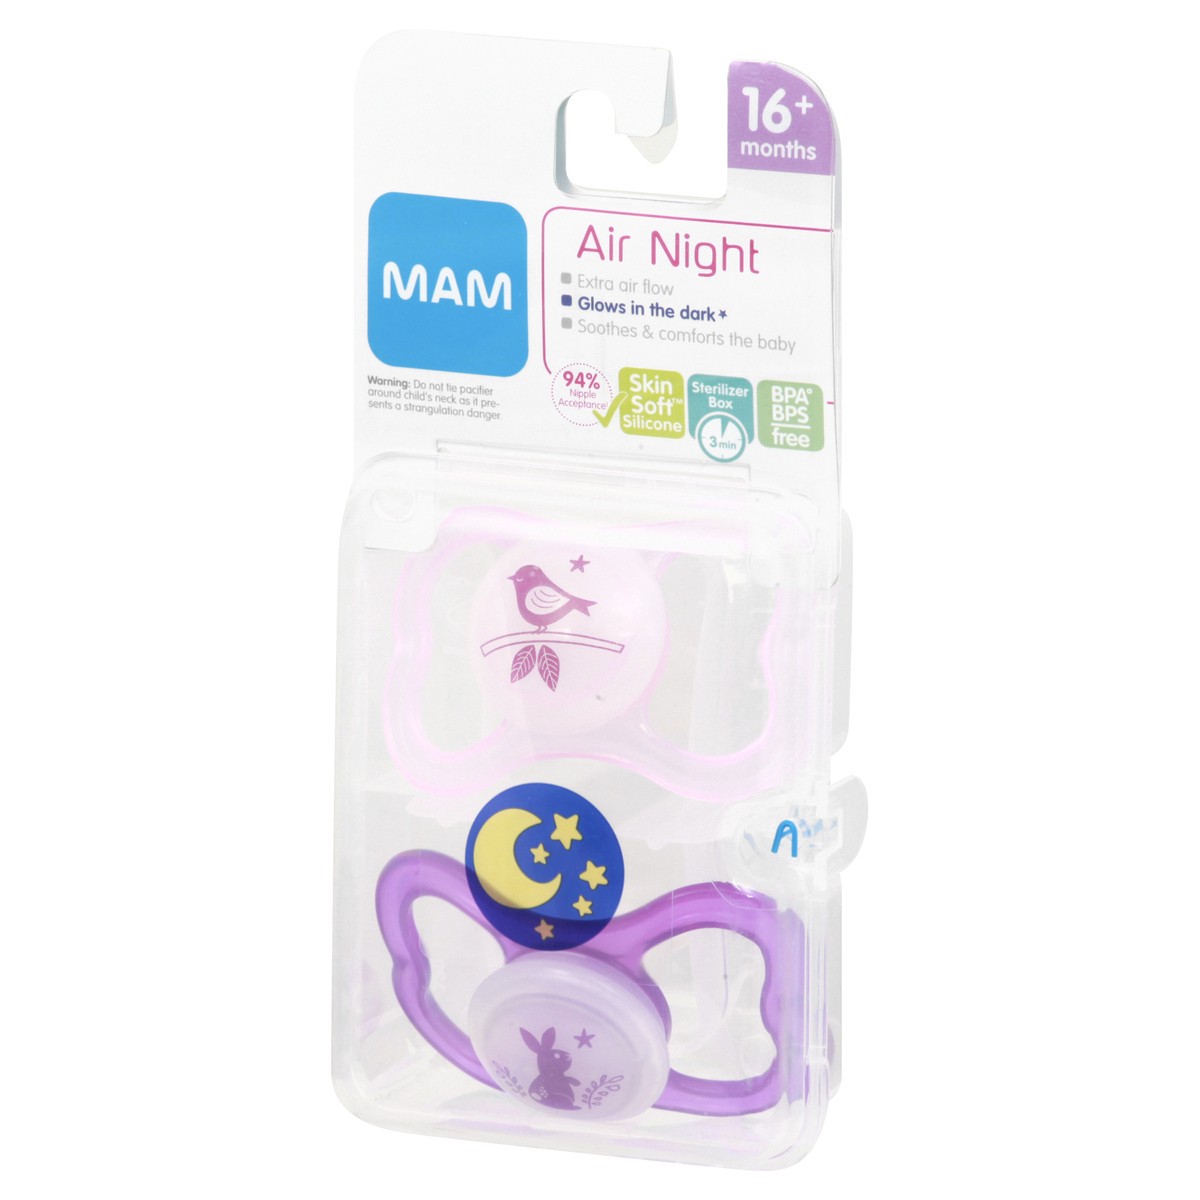 slide 10 of 11, MAM Air Night 16+ months Pacifier 2 ea, 2 ct